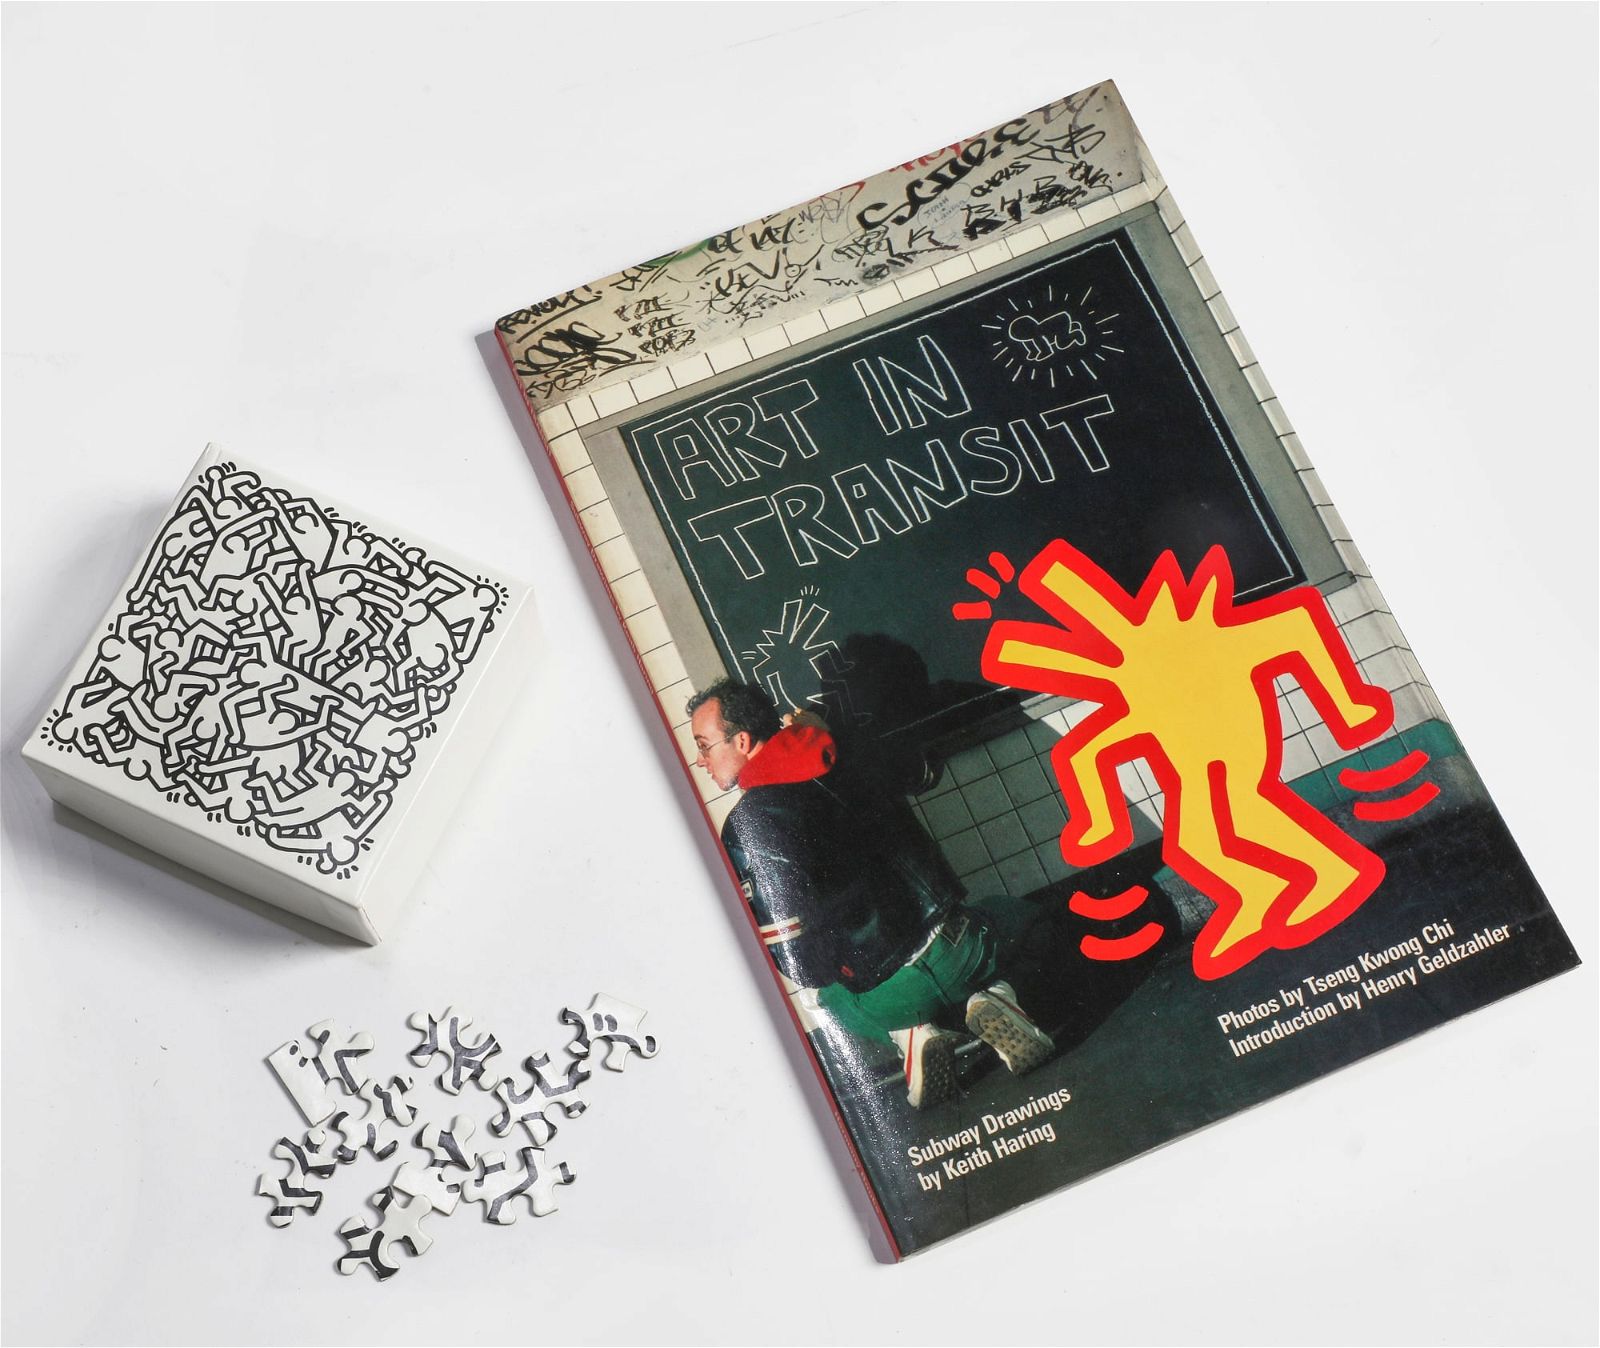 A KEITH HARING BOOK AND JIGSAW